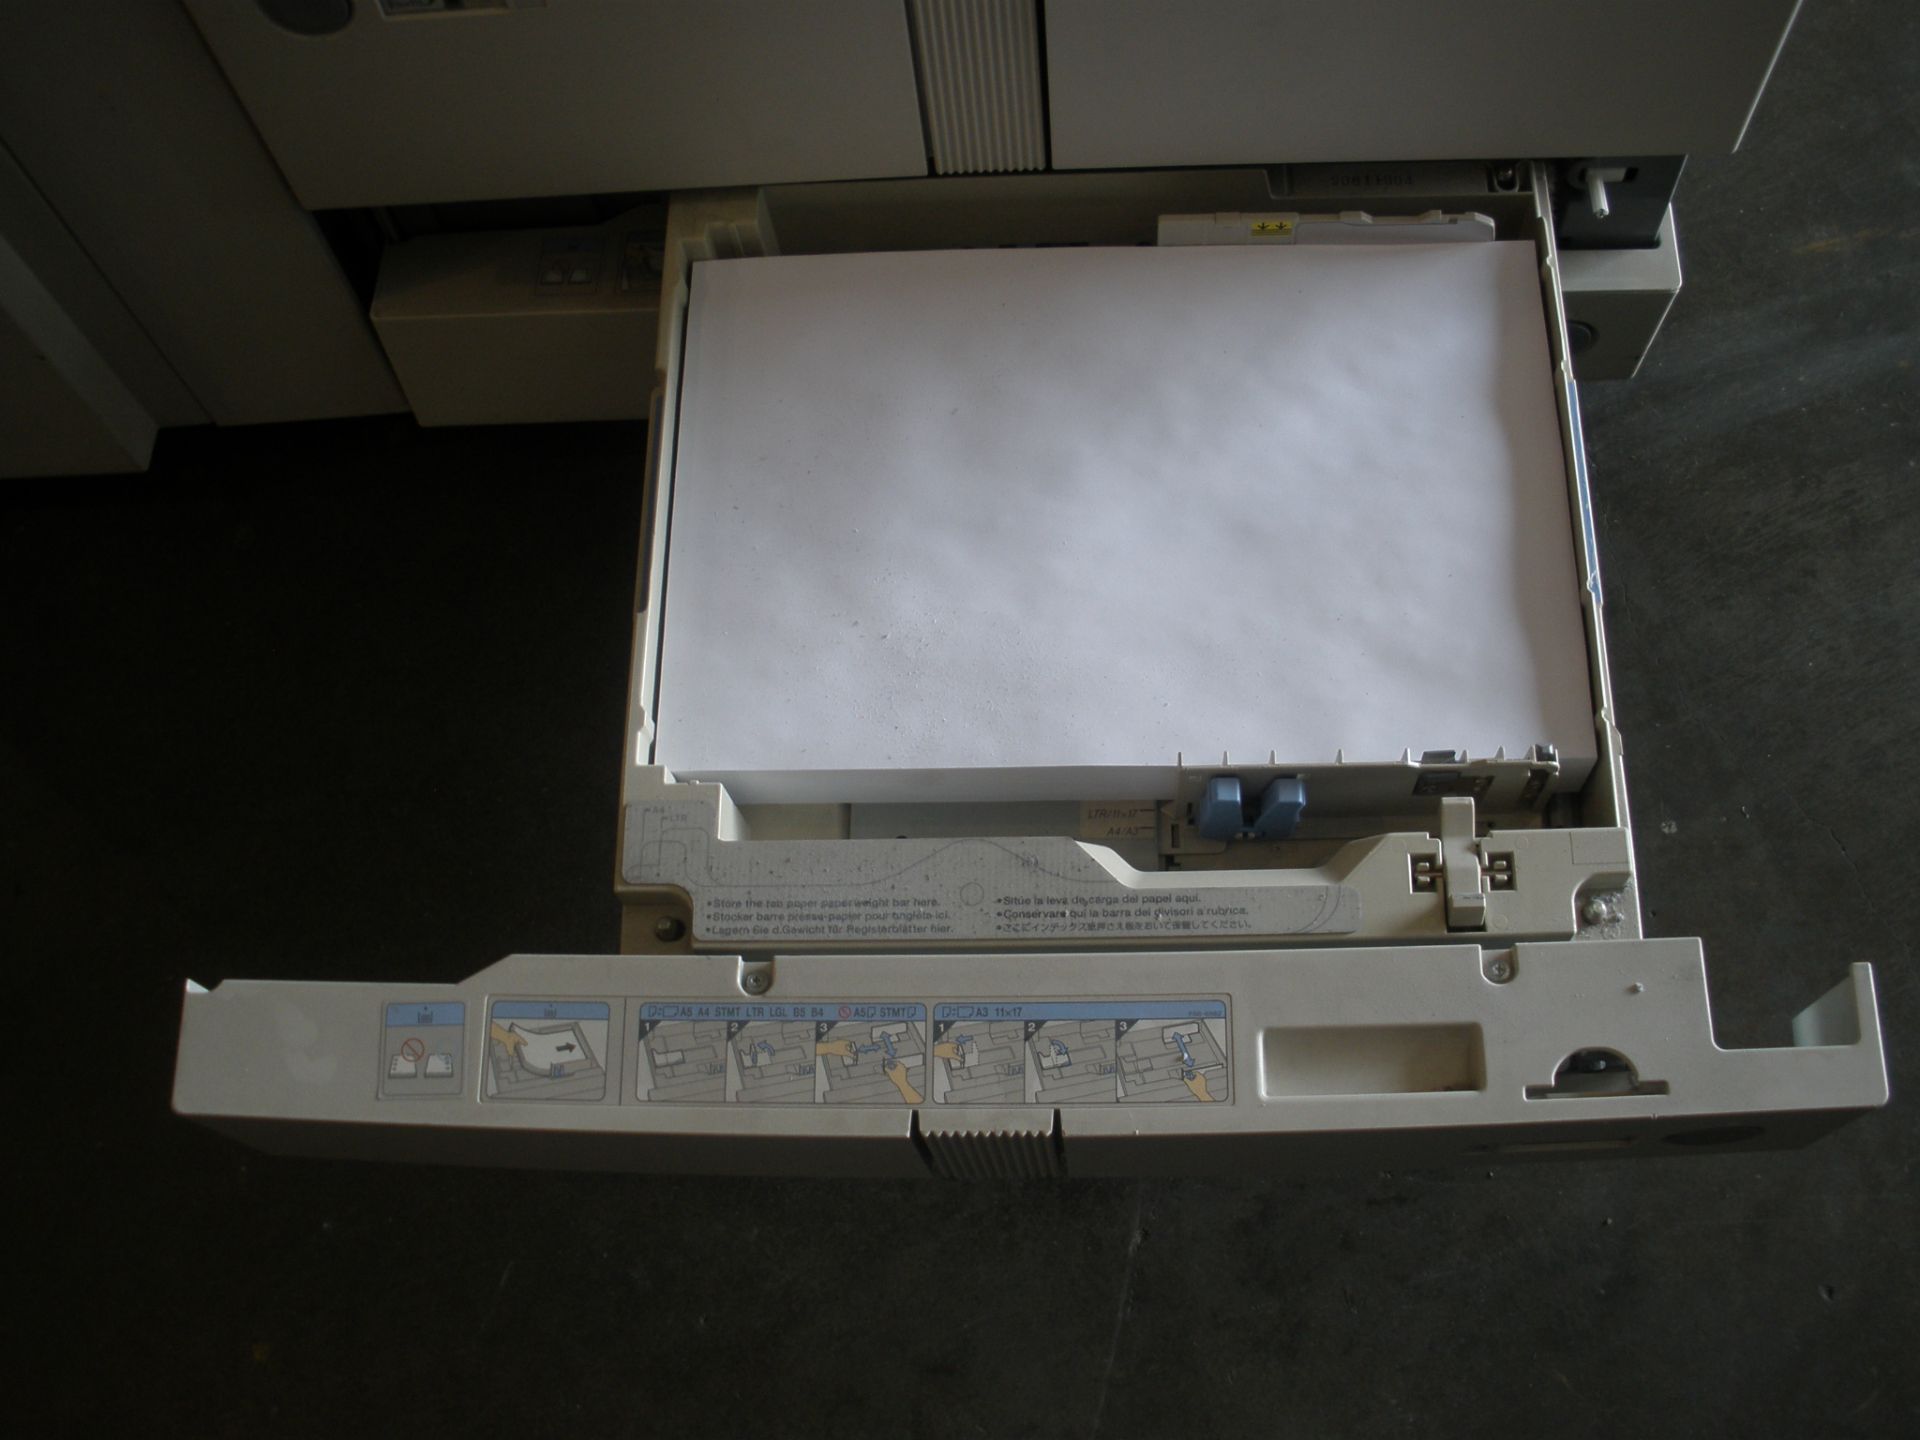 Cannon Image Runner Model 105 Copy Machine Counter 13299482 Copy’s W/Video - Image 8 of 12